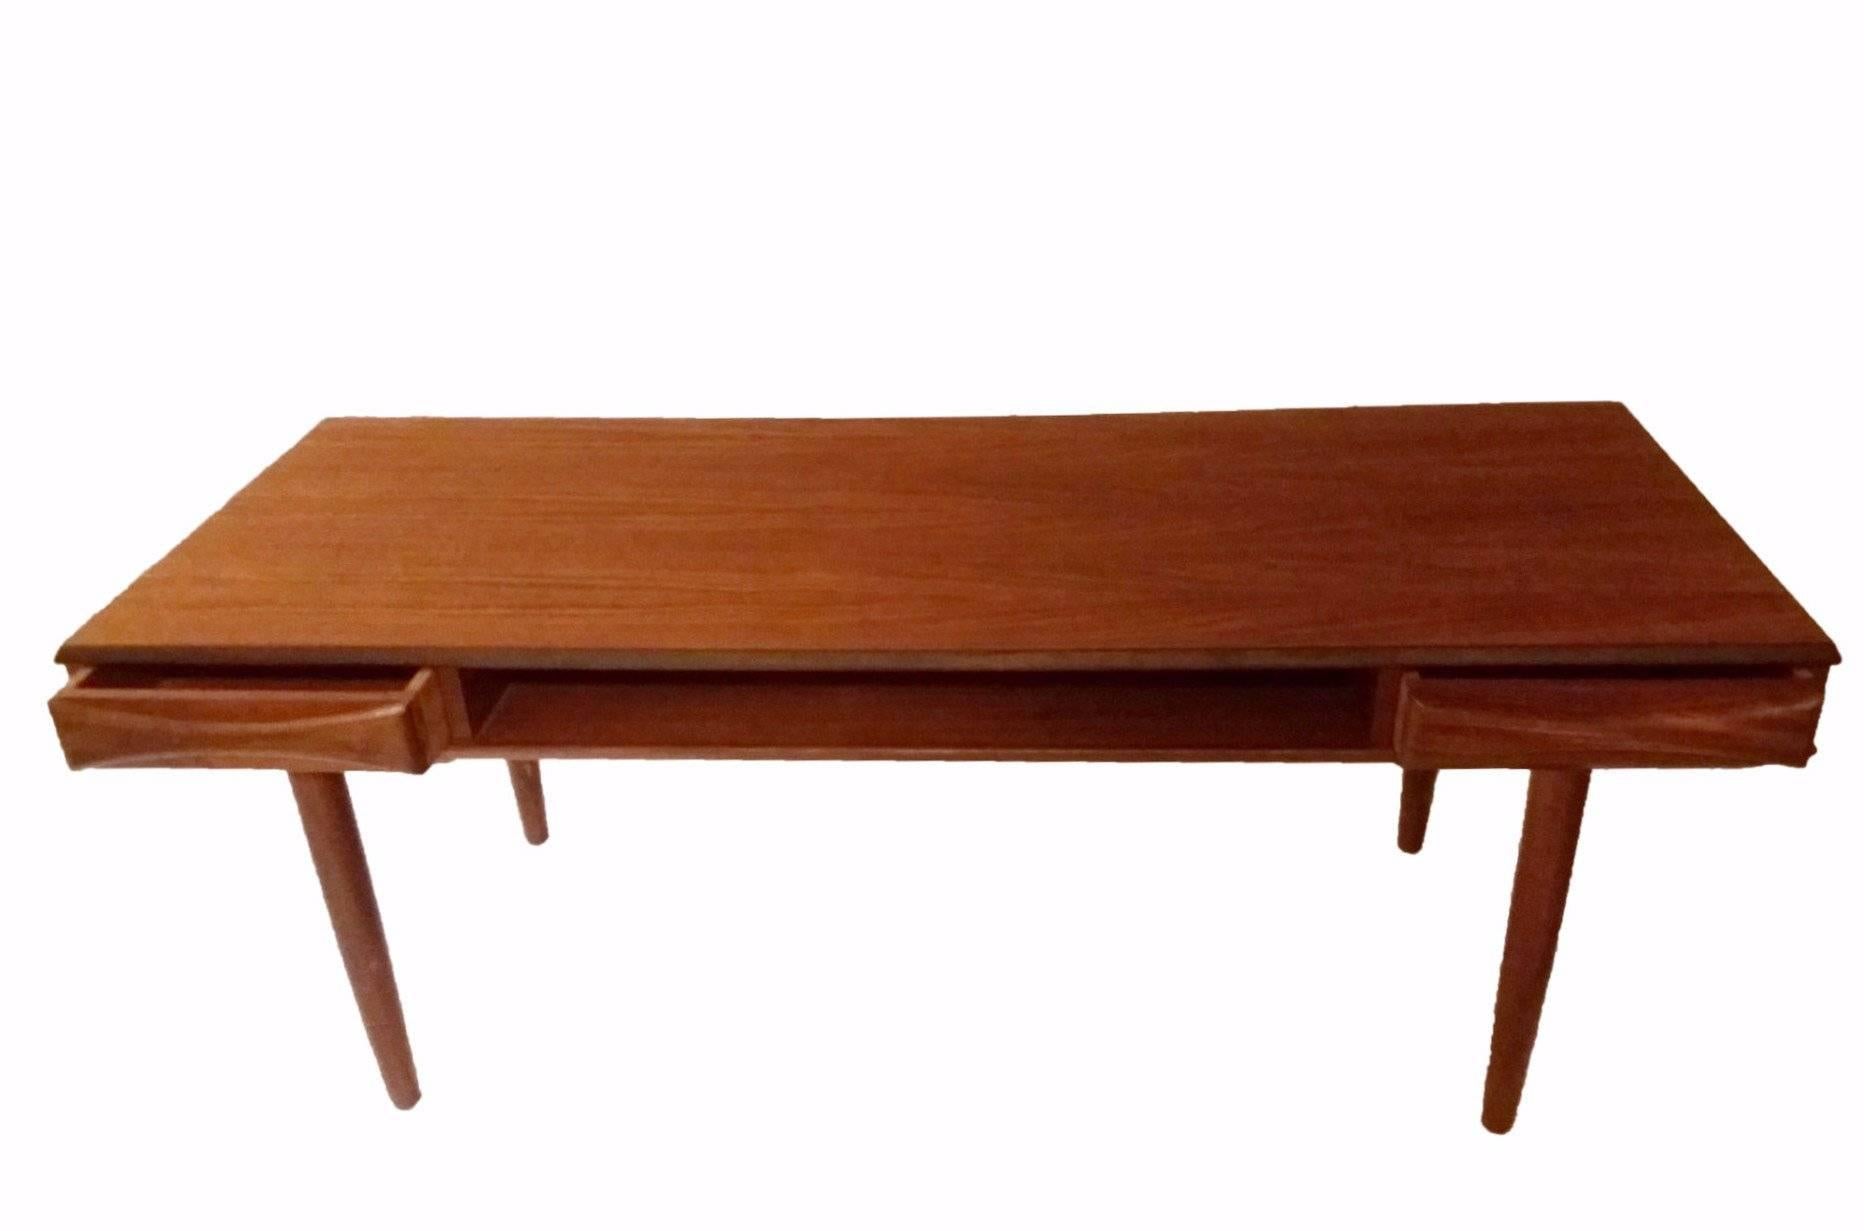 This Danish 1950s Arne Vodder style teak coffee table comes with a central book shelf and 